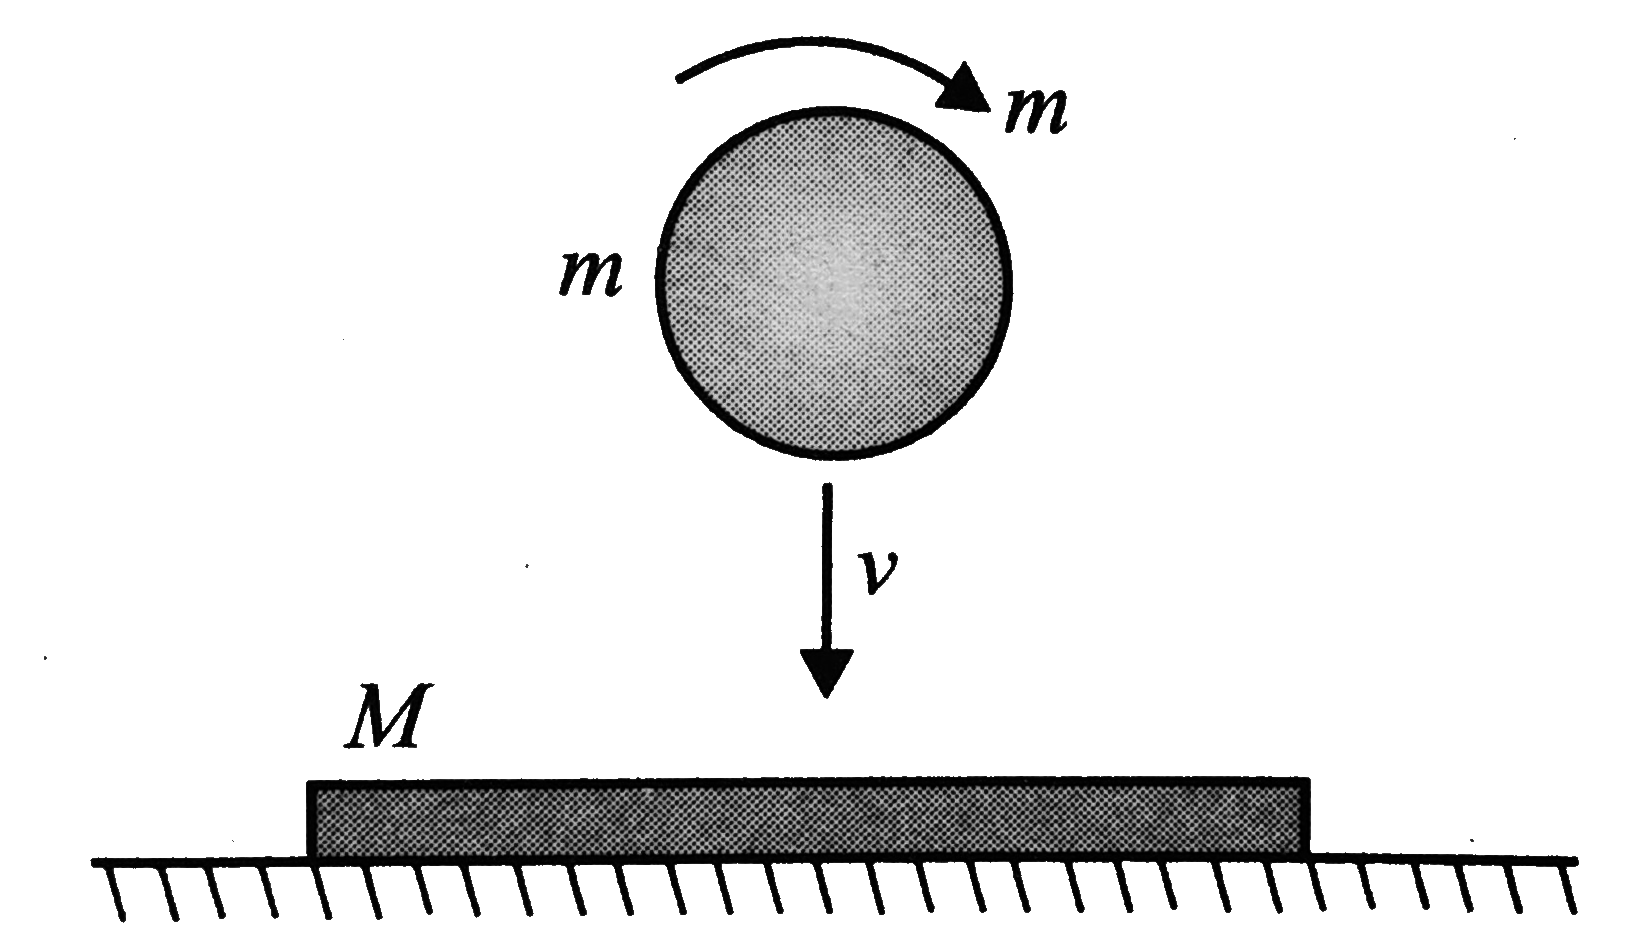 A solid ball of mass m and radius r spinning with angular velocity omega falls on a horizontal slab of mass M with rough upper surface (coefficient of friction mu) and smooth lower surface. Immediately after collision the normal component of velocity of the ball remains half of its value just before collision and it stops spinning. Find the velocity (in m//s) of the sphere in horizontal direction immediately after the impact (given: Romega= 5).